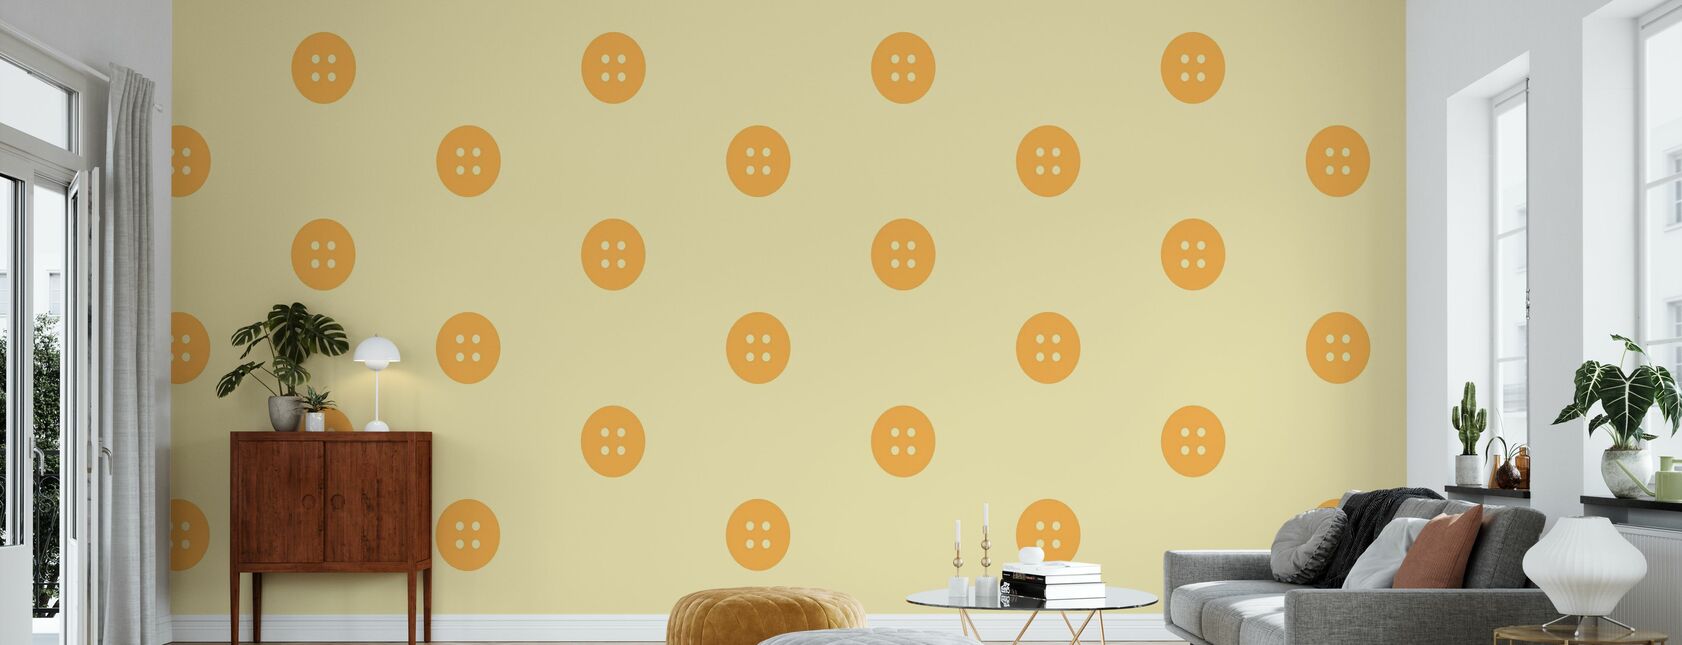 Yellow Buttons - Wallpaper - Living Room